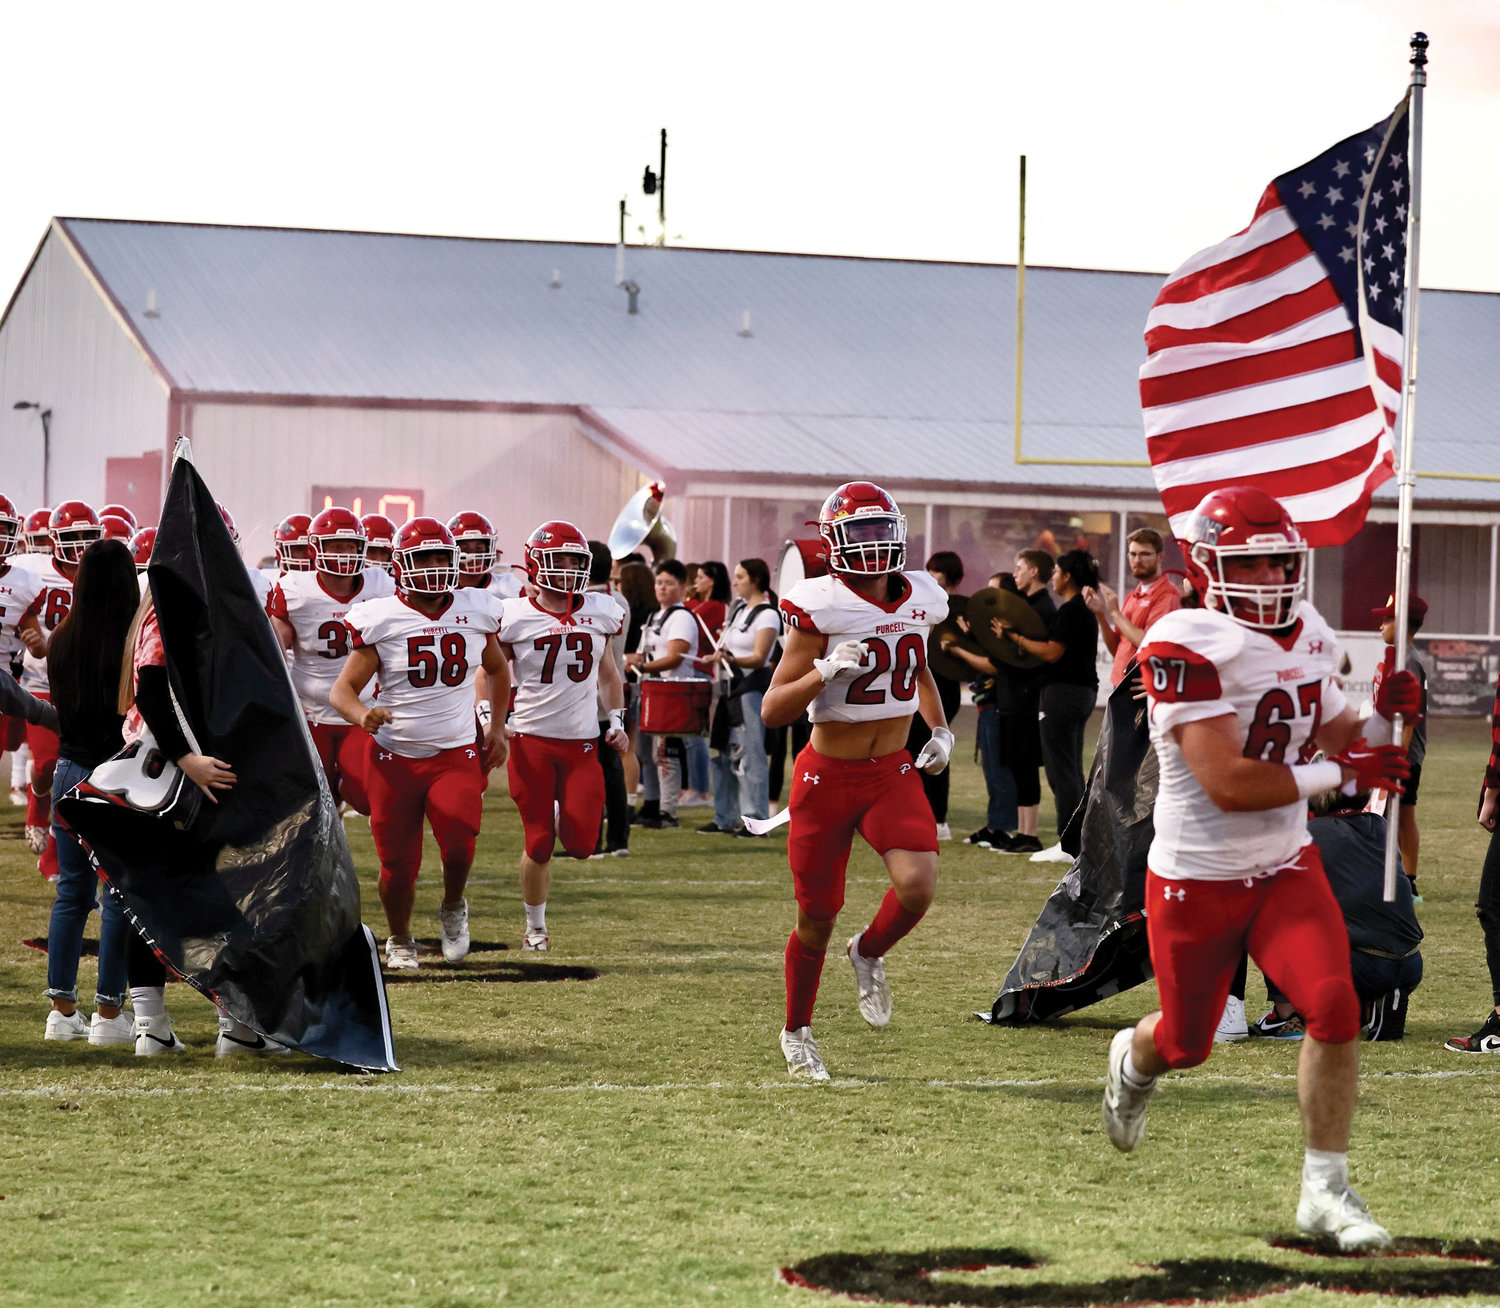 Purcell senior Luke Edelman (67) leads his team on the field in Washington carrying the American flag last Friday night. The Dragons fell to the Warriors 40-7.